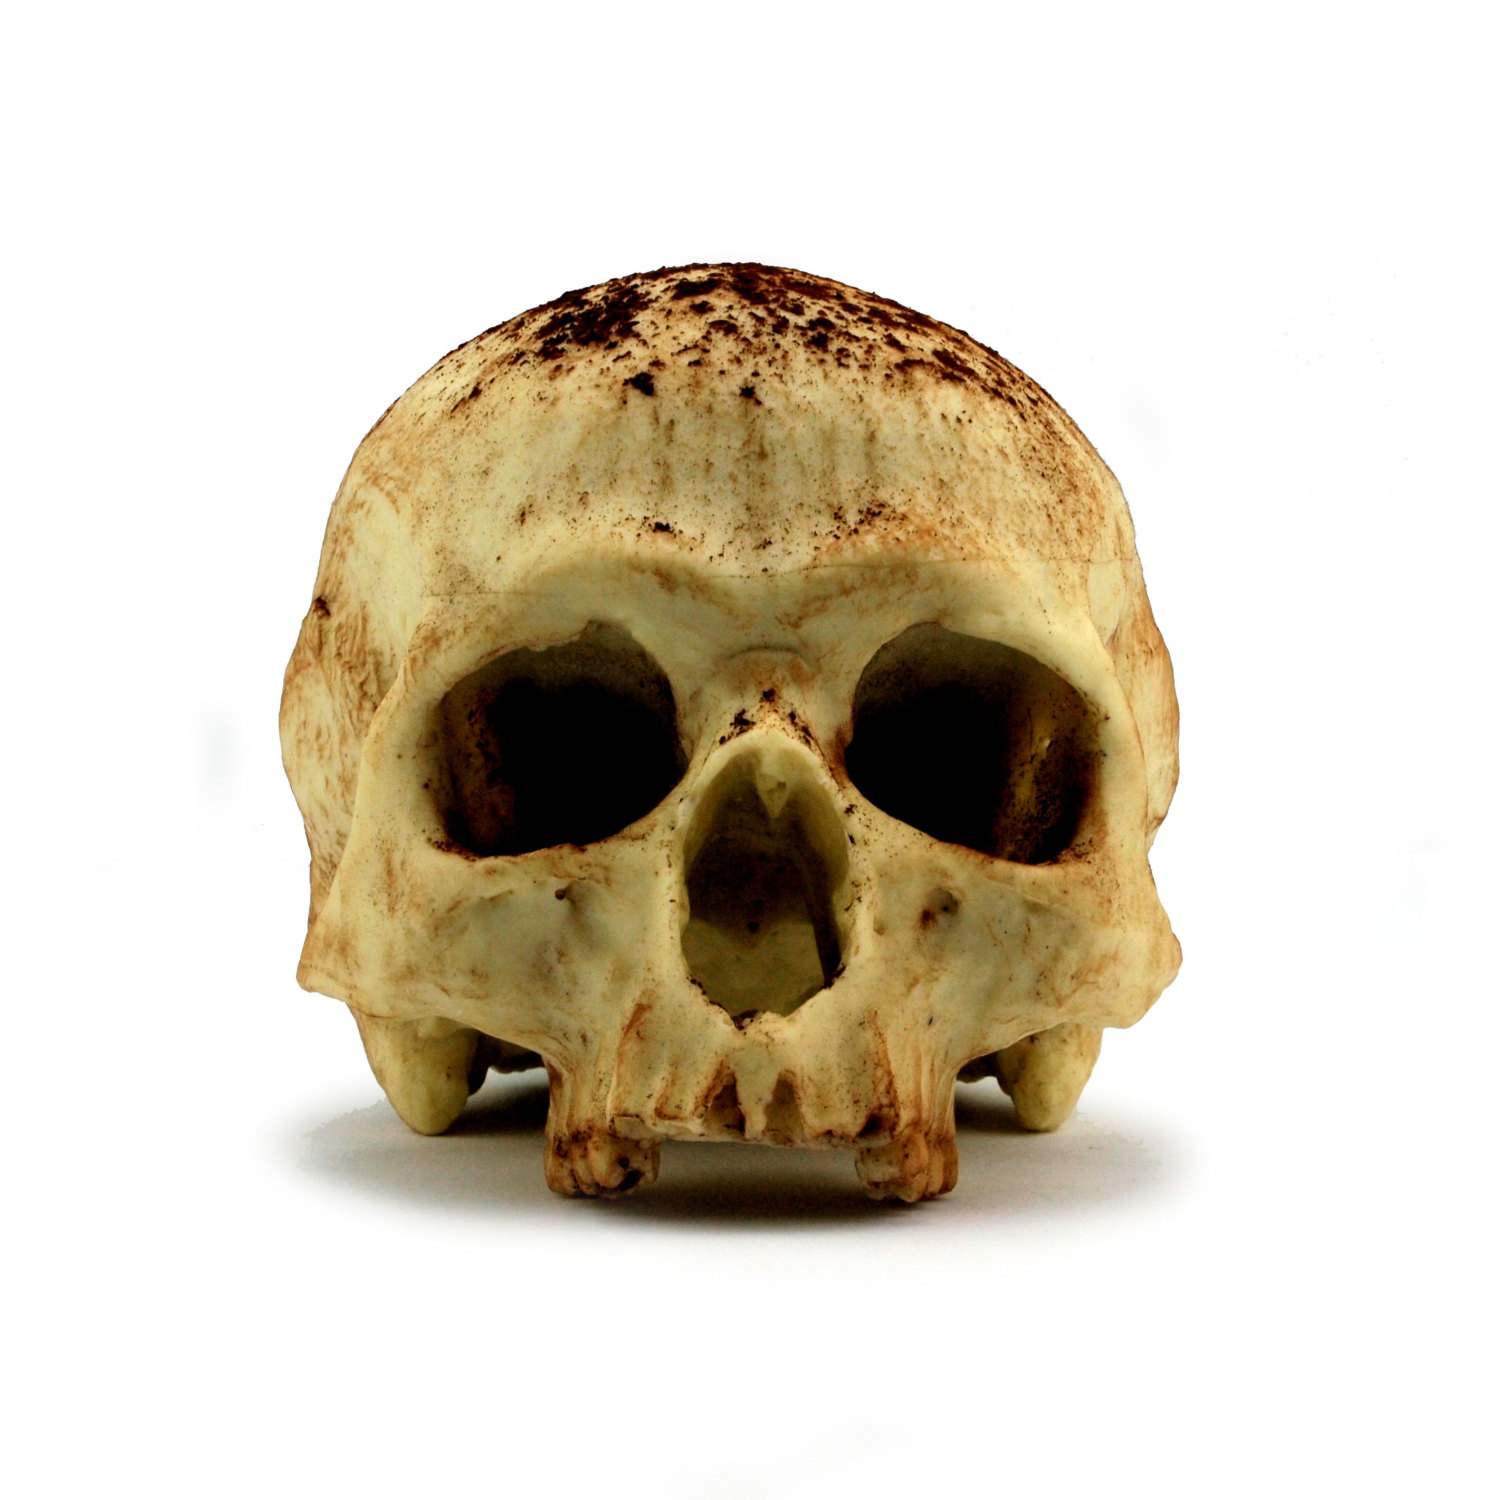 Special Edition White Chocolate Skull Anatomically Correct